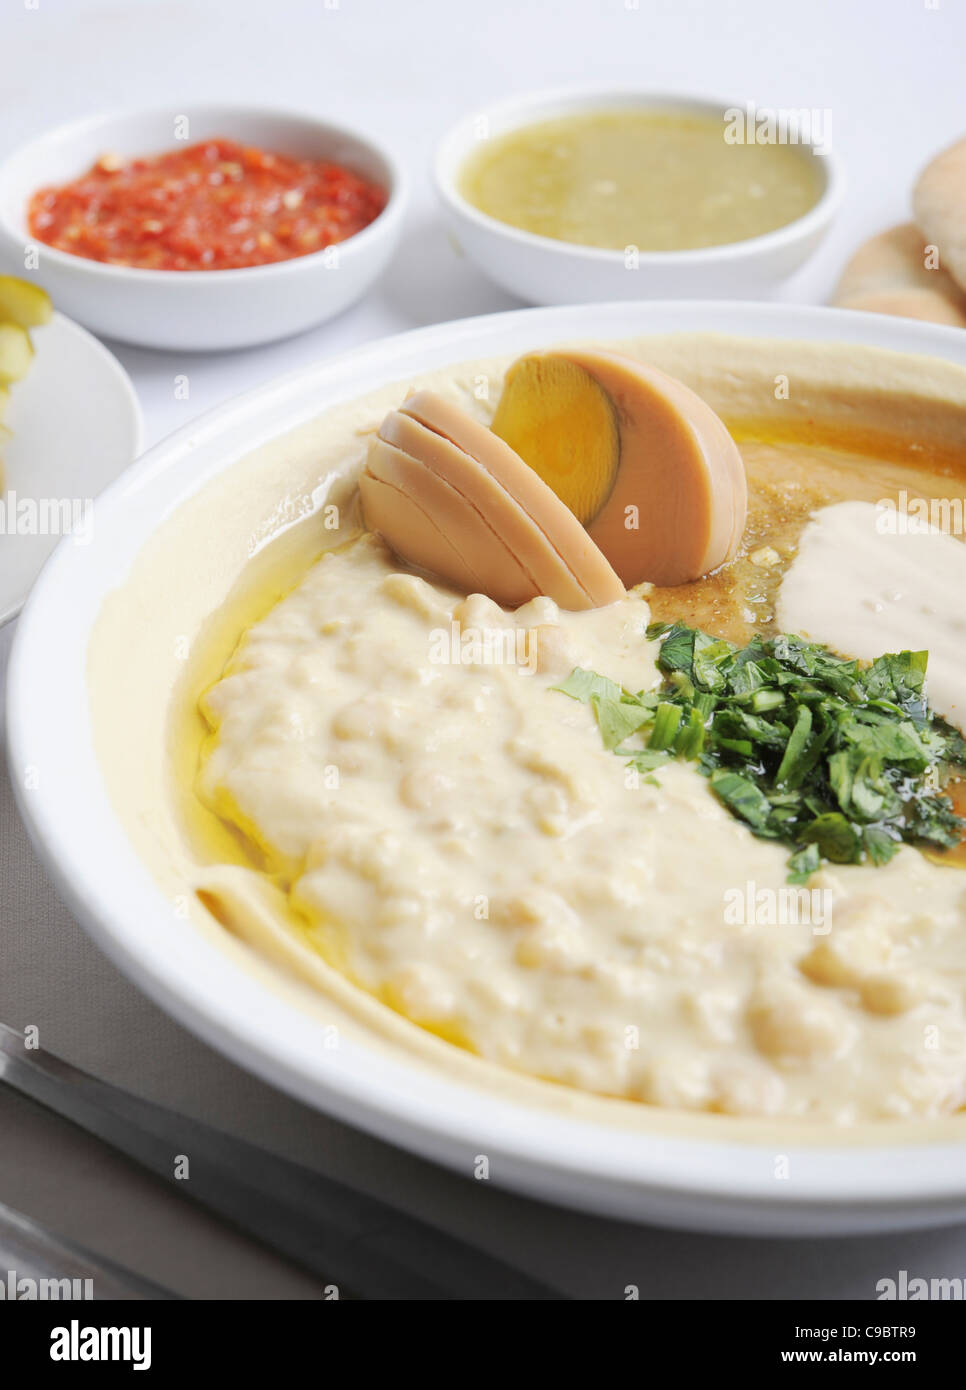 Hummus. A Levantine Arab dip or spread made from cooked, mashed chickpeas, blended with tahini, Stock Photo